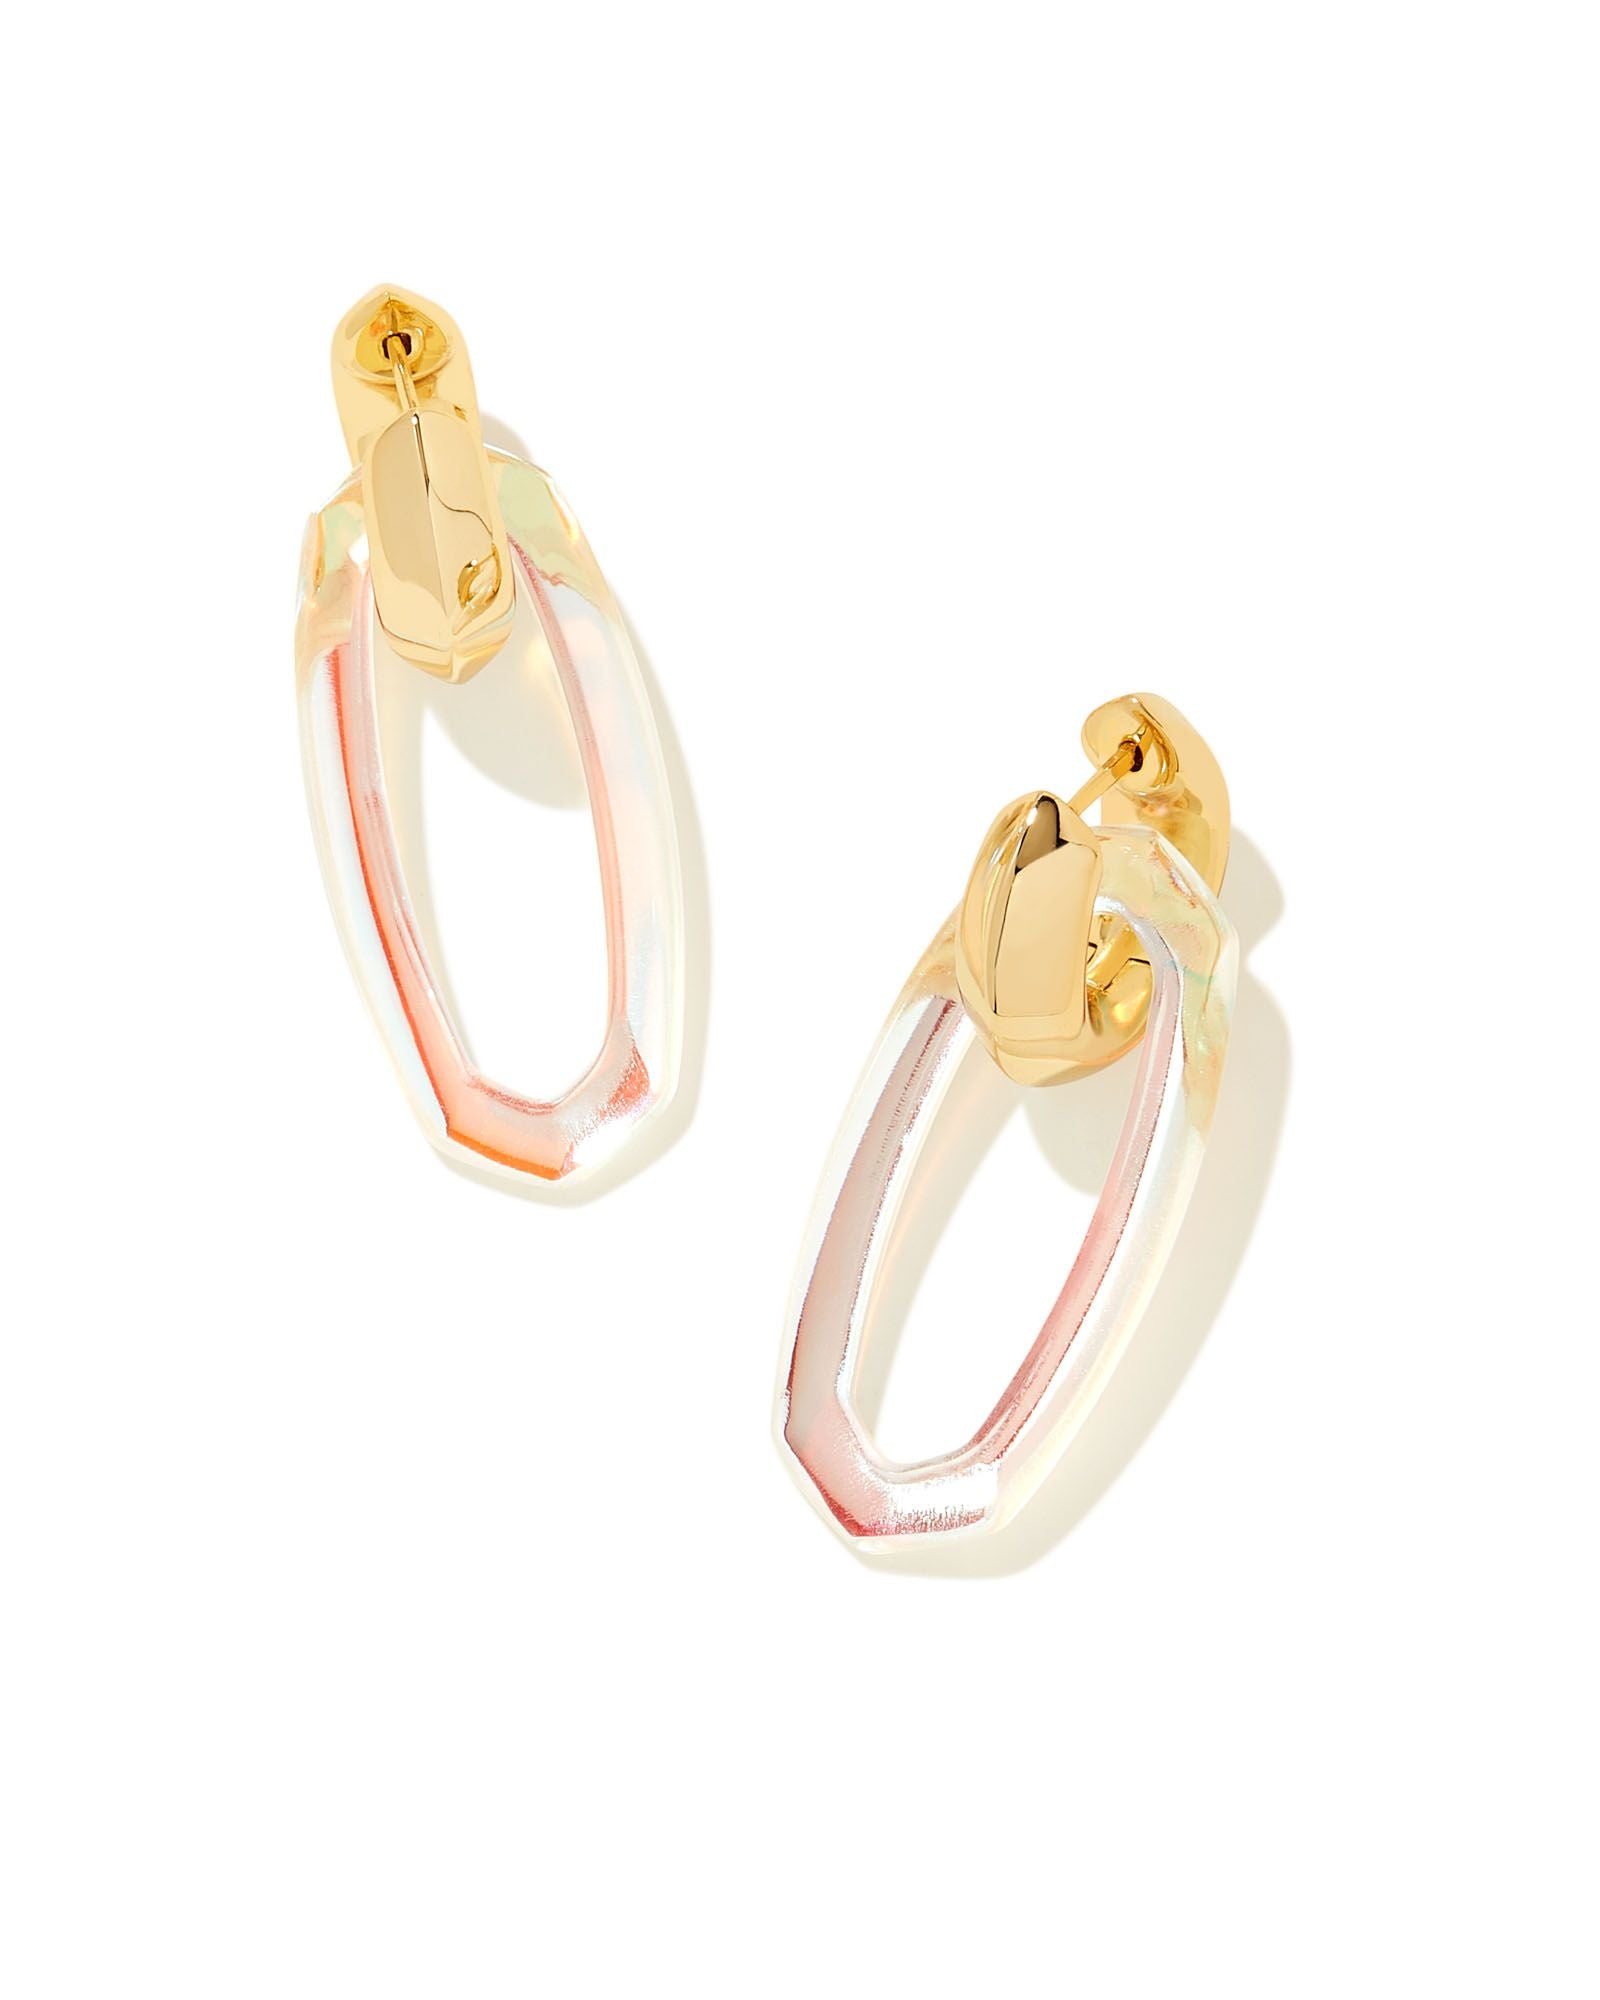 Elle Link Earring in Gold Dichroic Glass